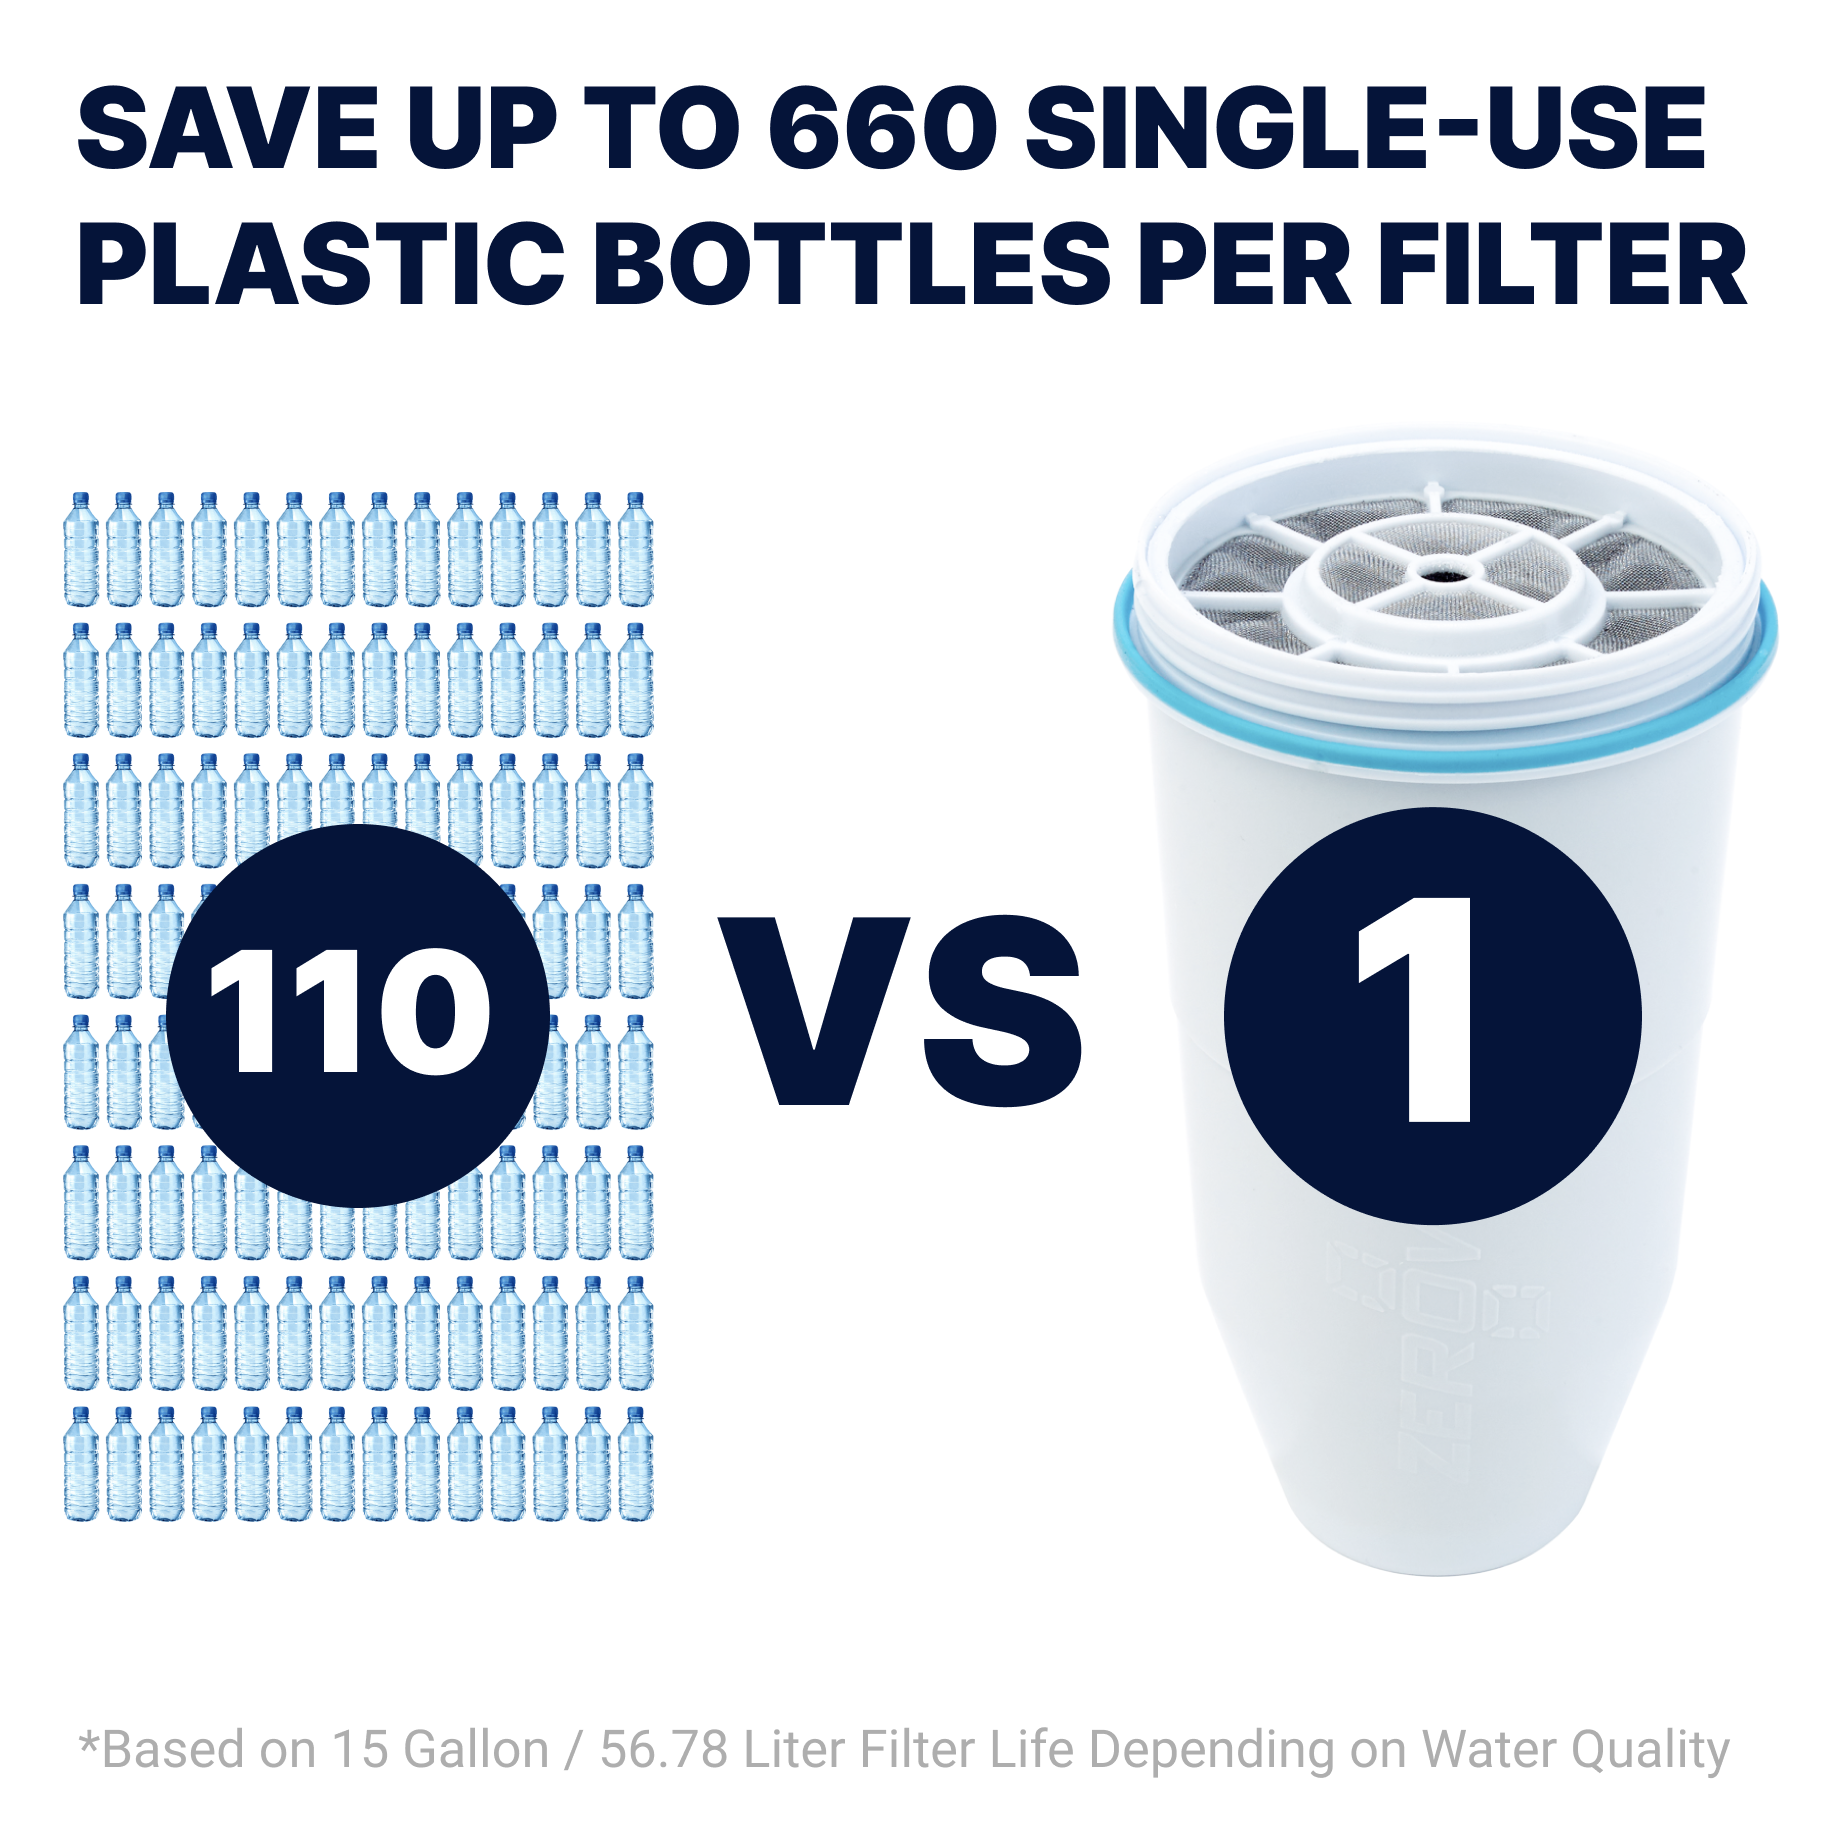 Save up to 660 single-use plastic bottles per filter